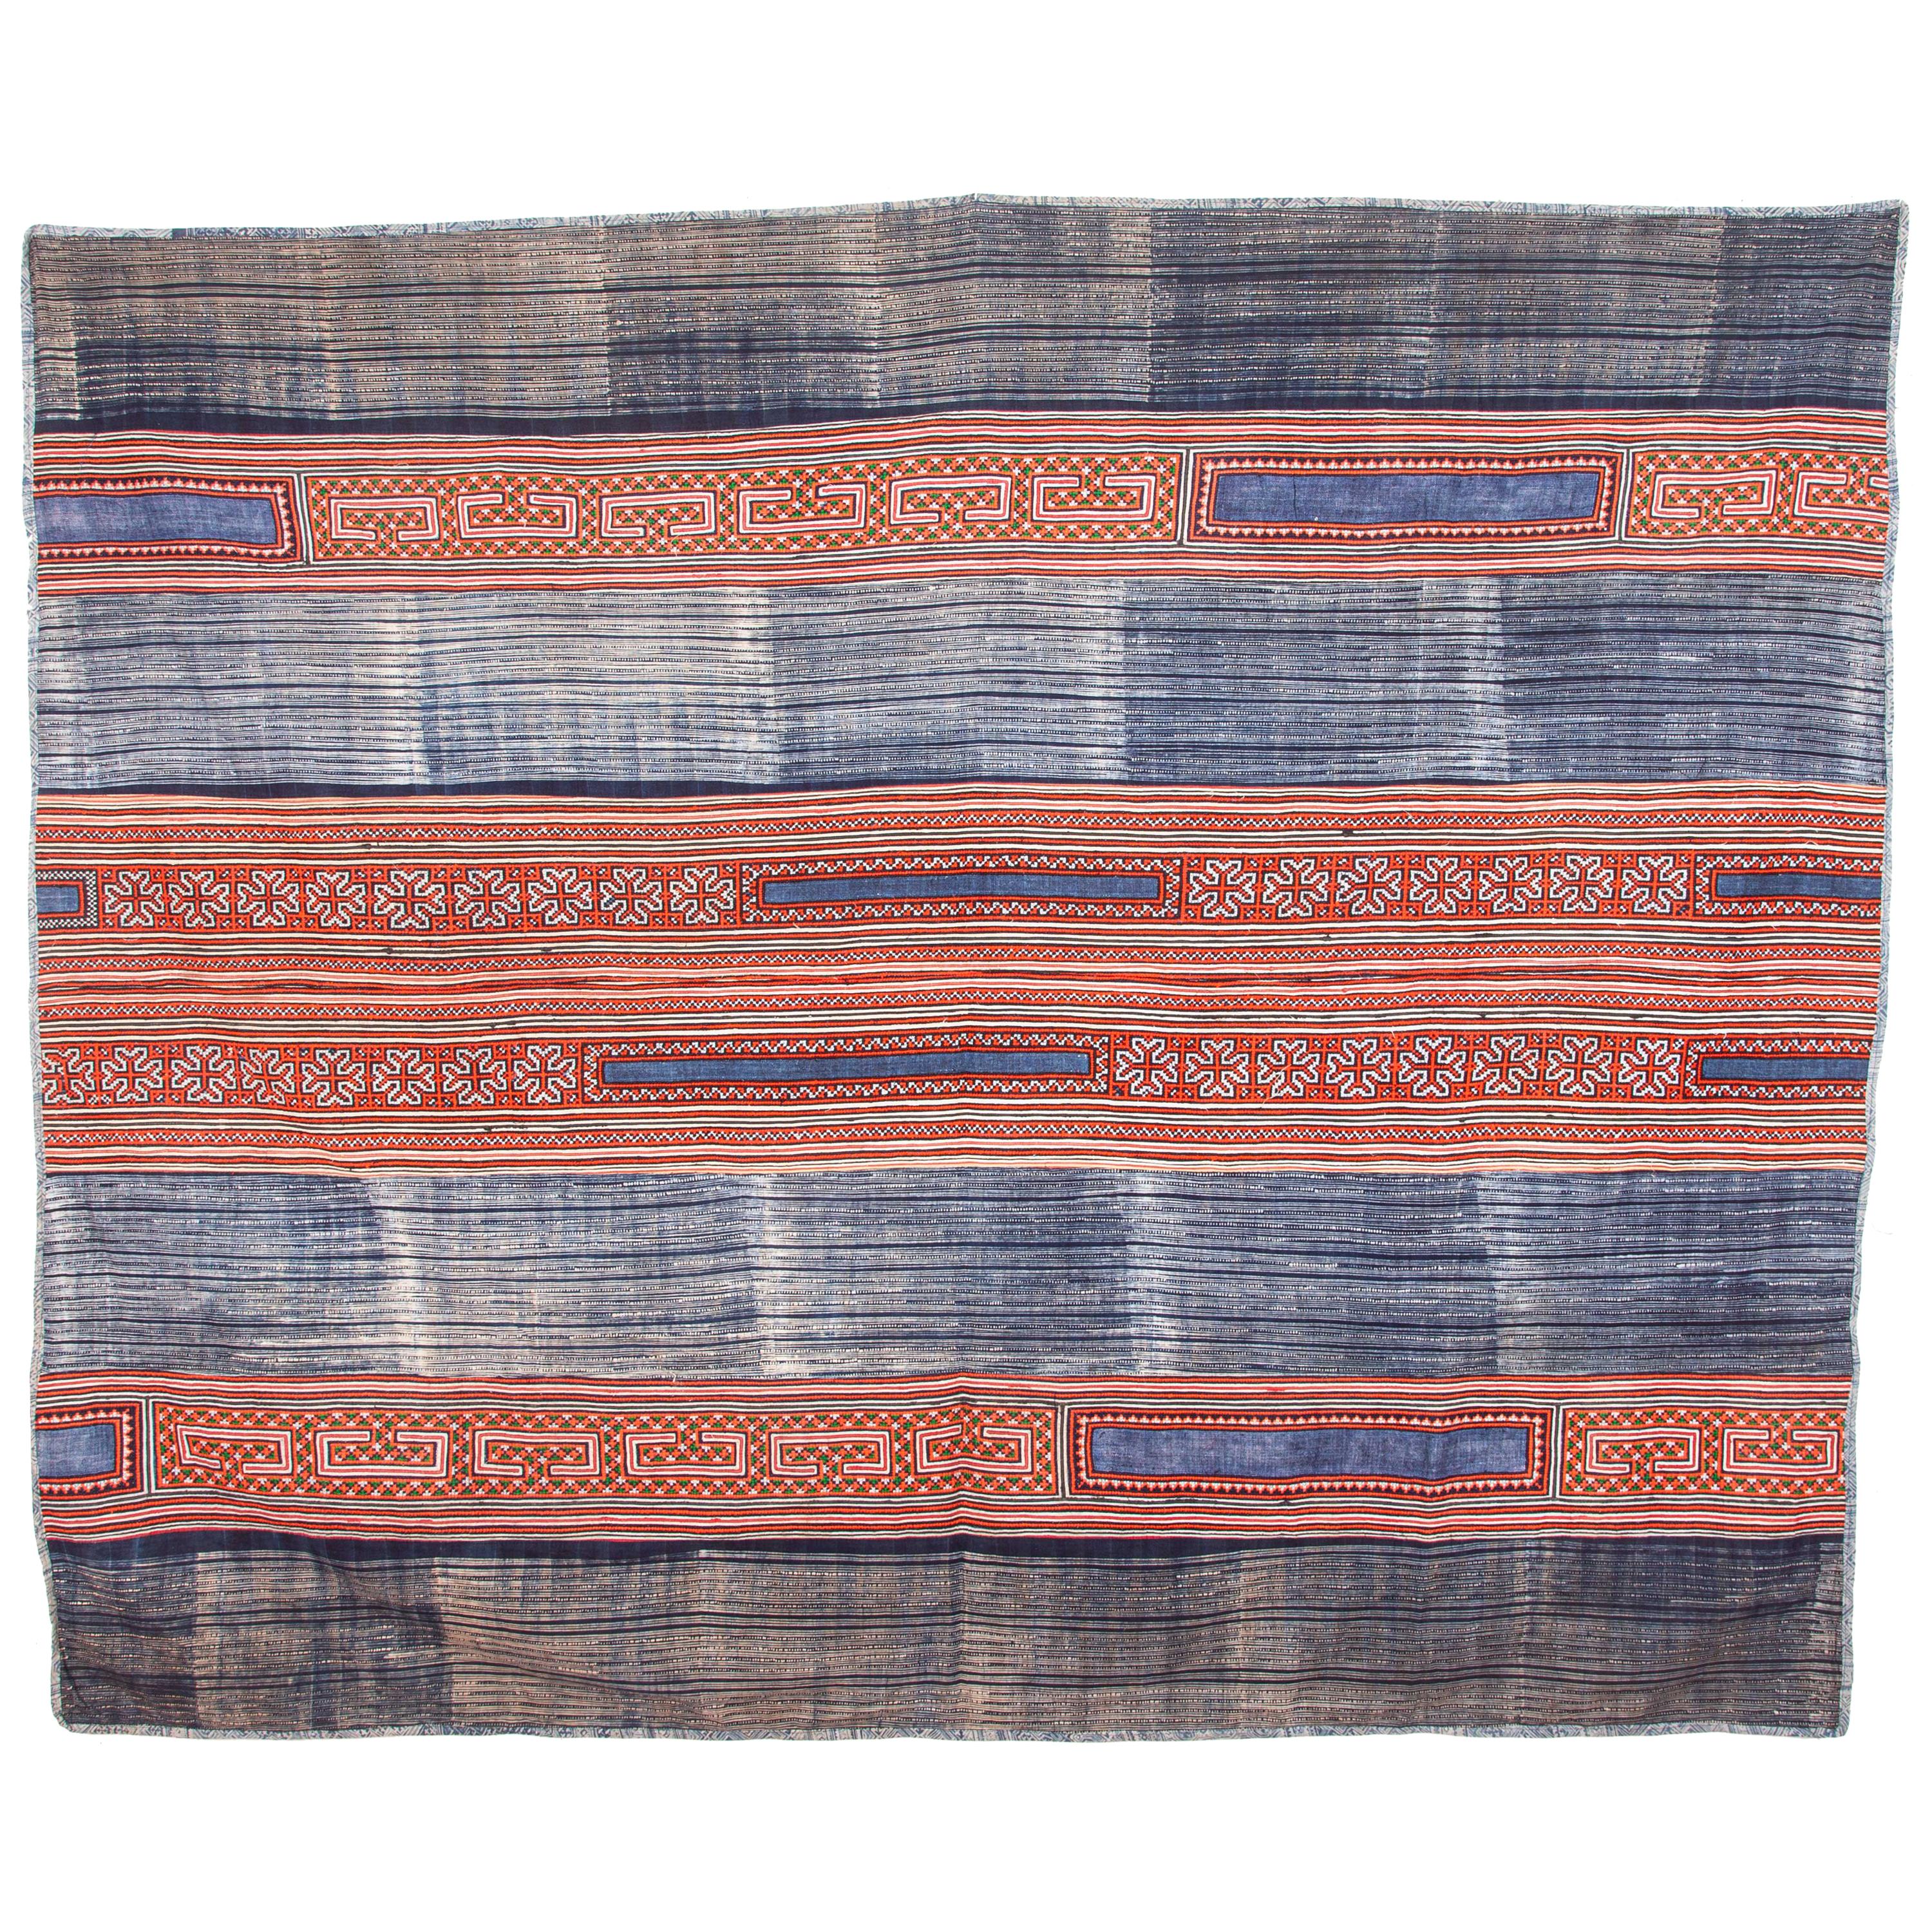 Hmong Batik and Embroidered Blanket with Indigo Color, Mid-20th Century For Sale